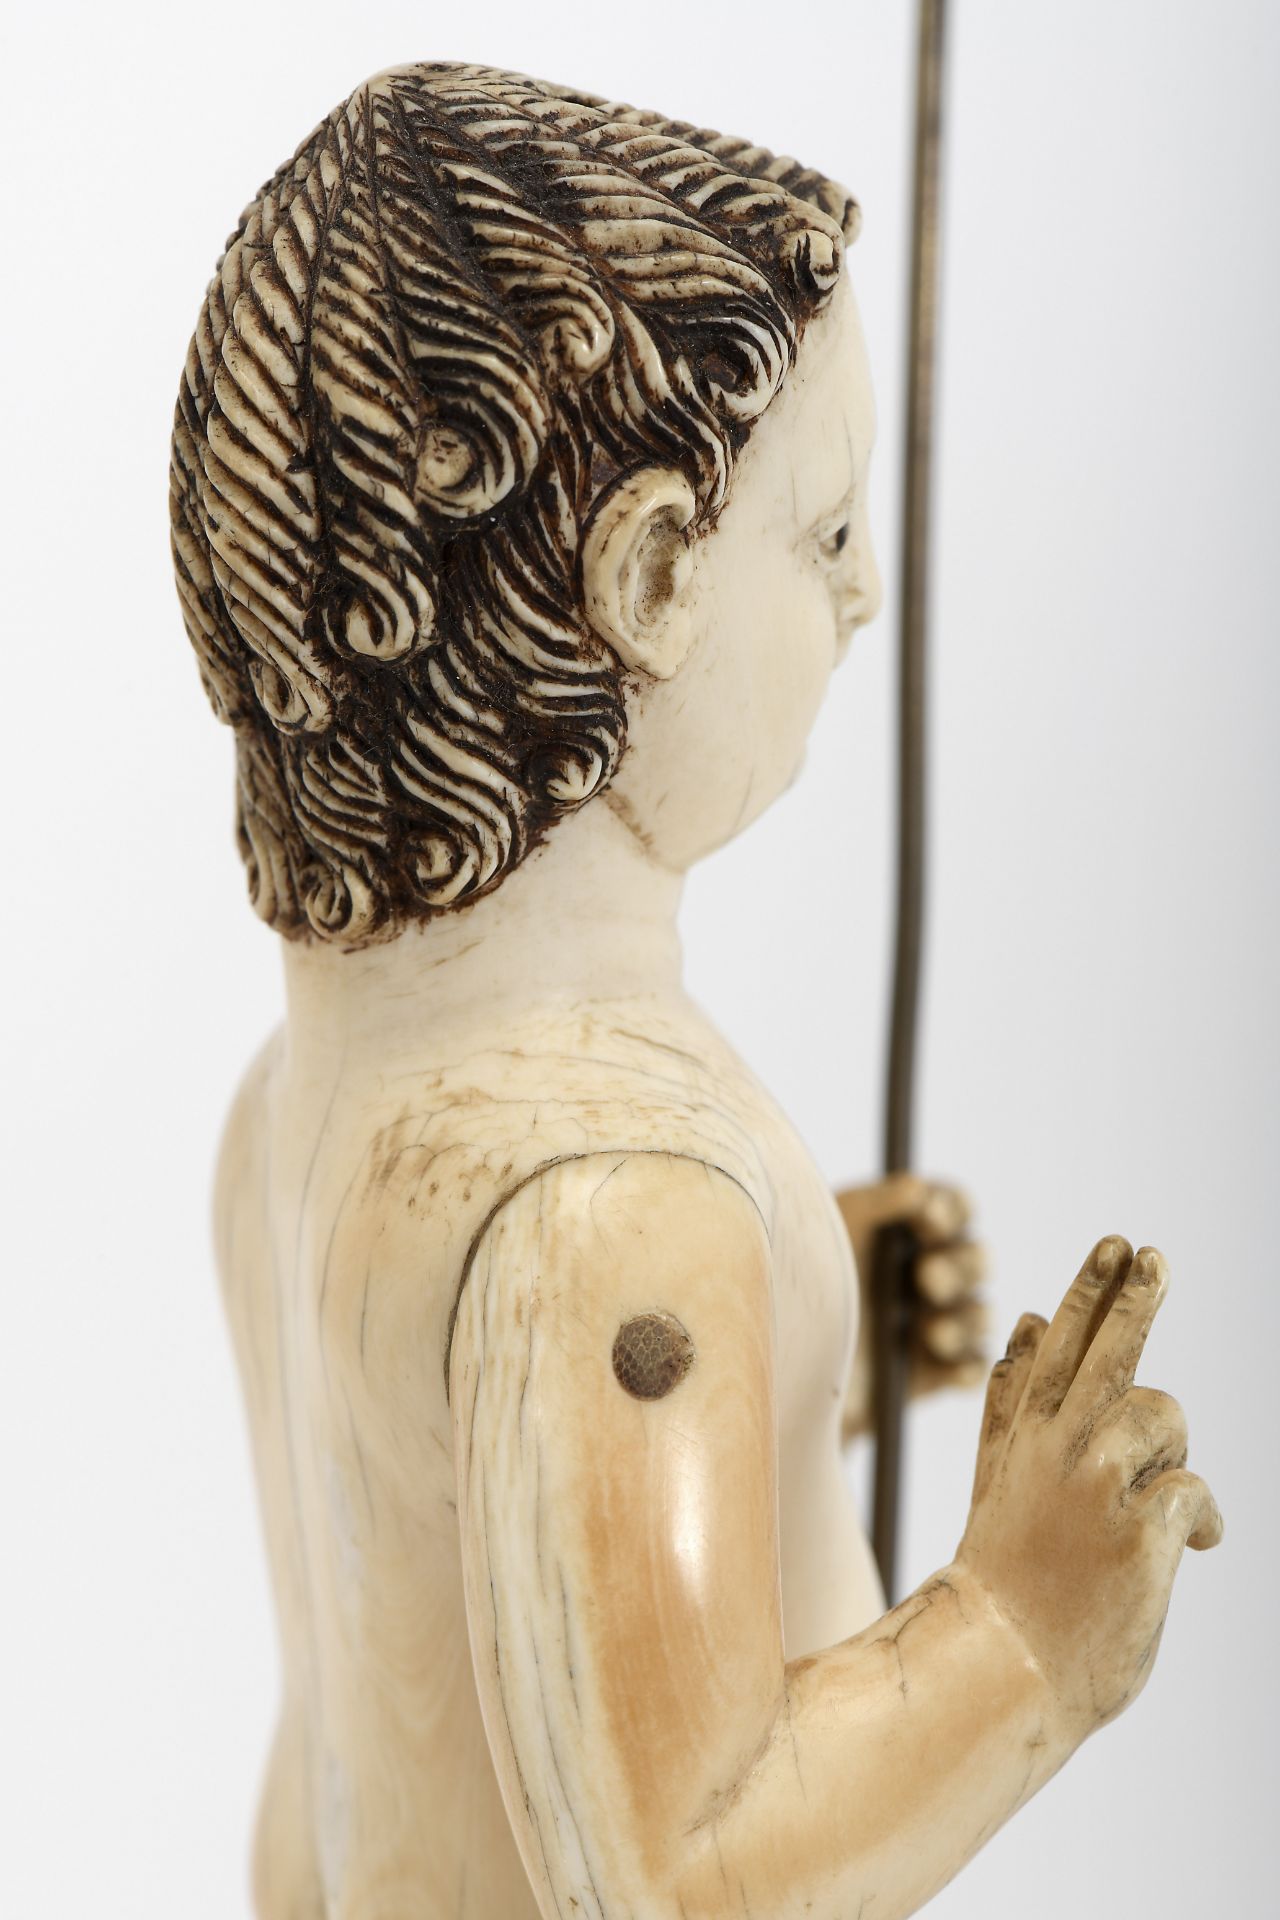 Child Jesus with a Cruciferous Rod on an Orb - Image 4 of 5